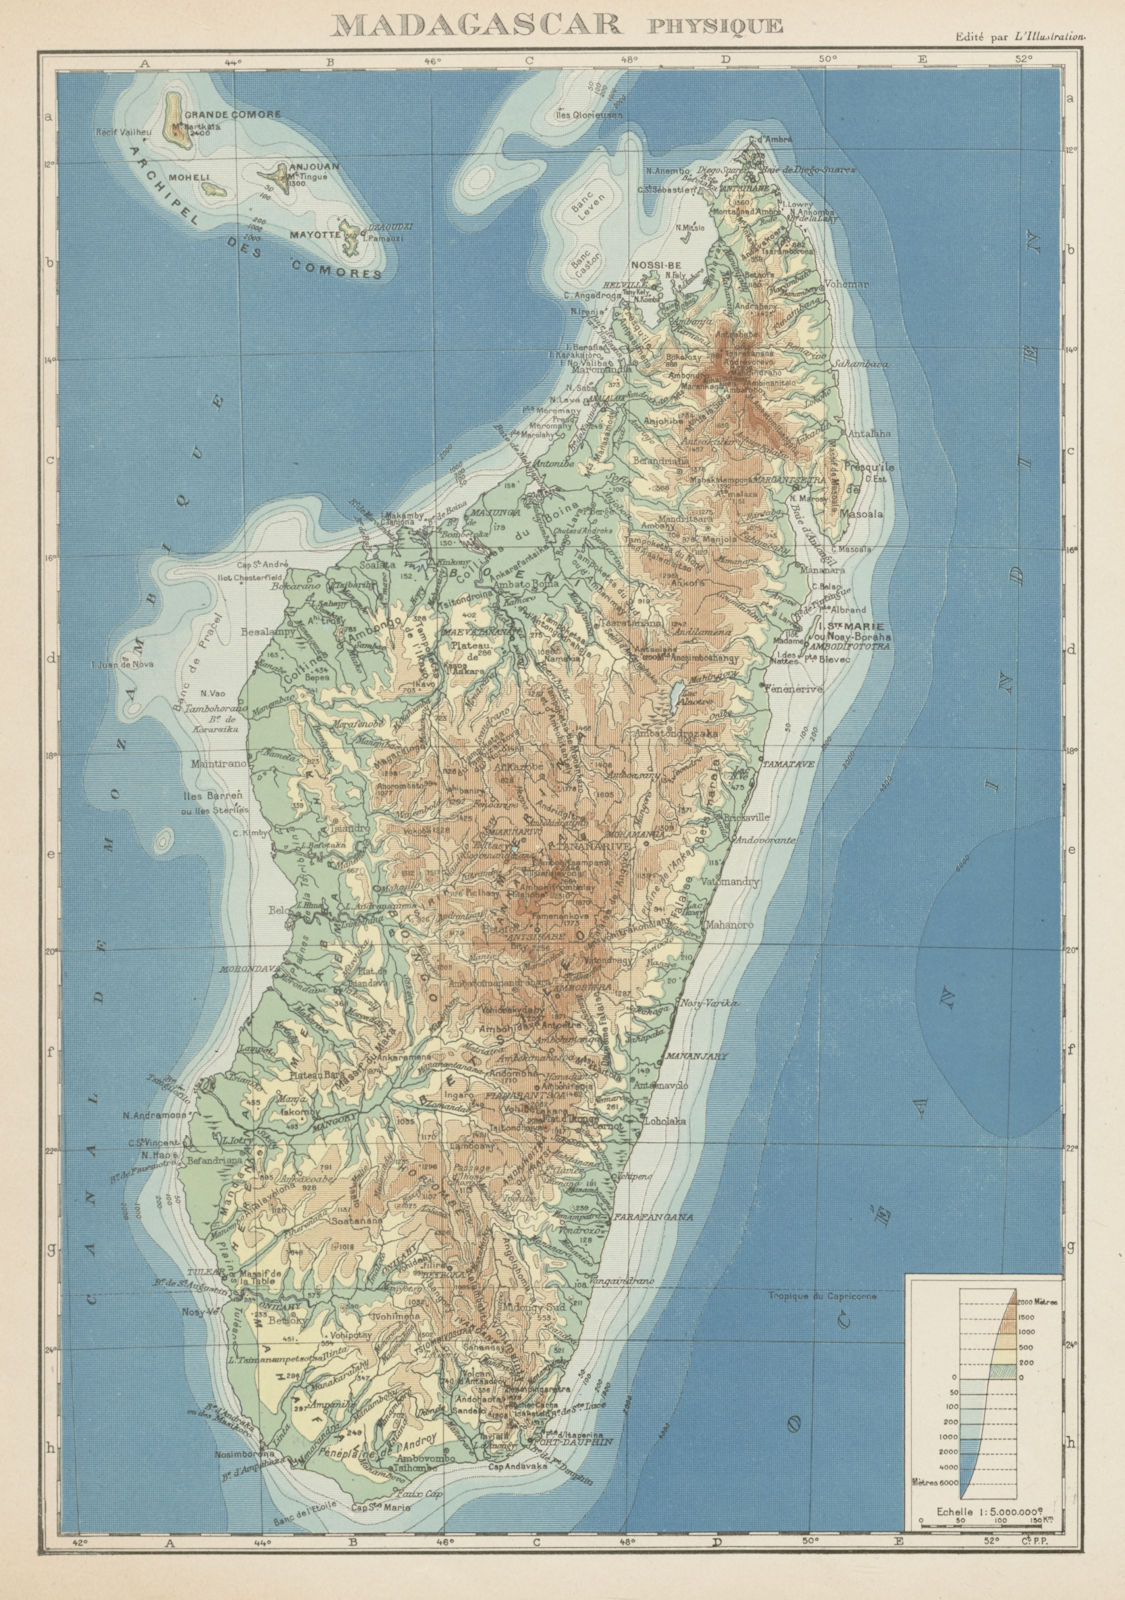 COLONIAL MADAGASCAR. Physique physical. Comoros & Mayotte 1929 old vintage map